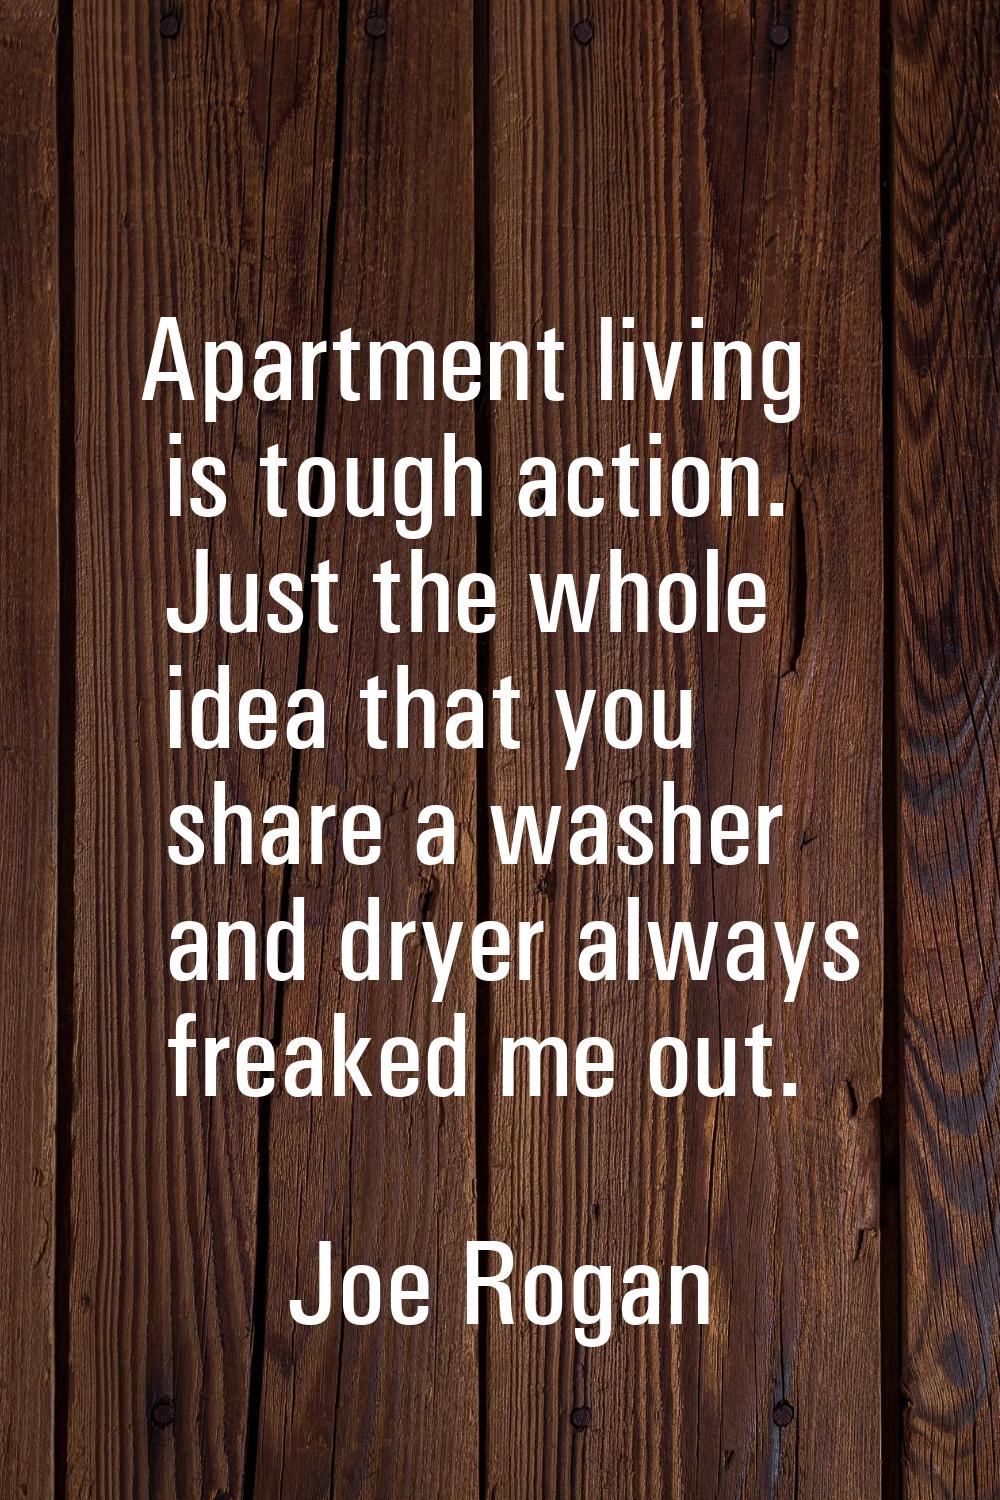 Apartment living is tough action. Just the whole idea that you share a washer and dryer always frea